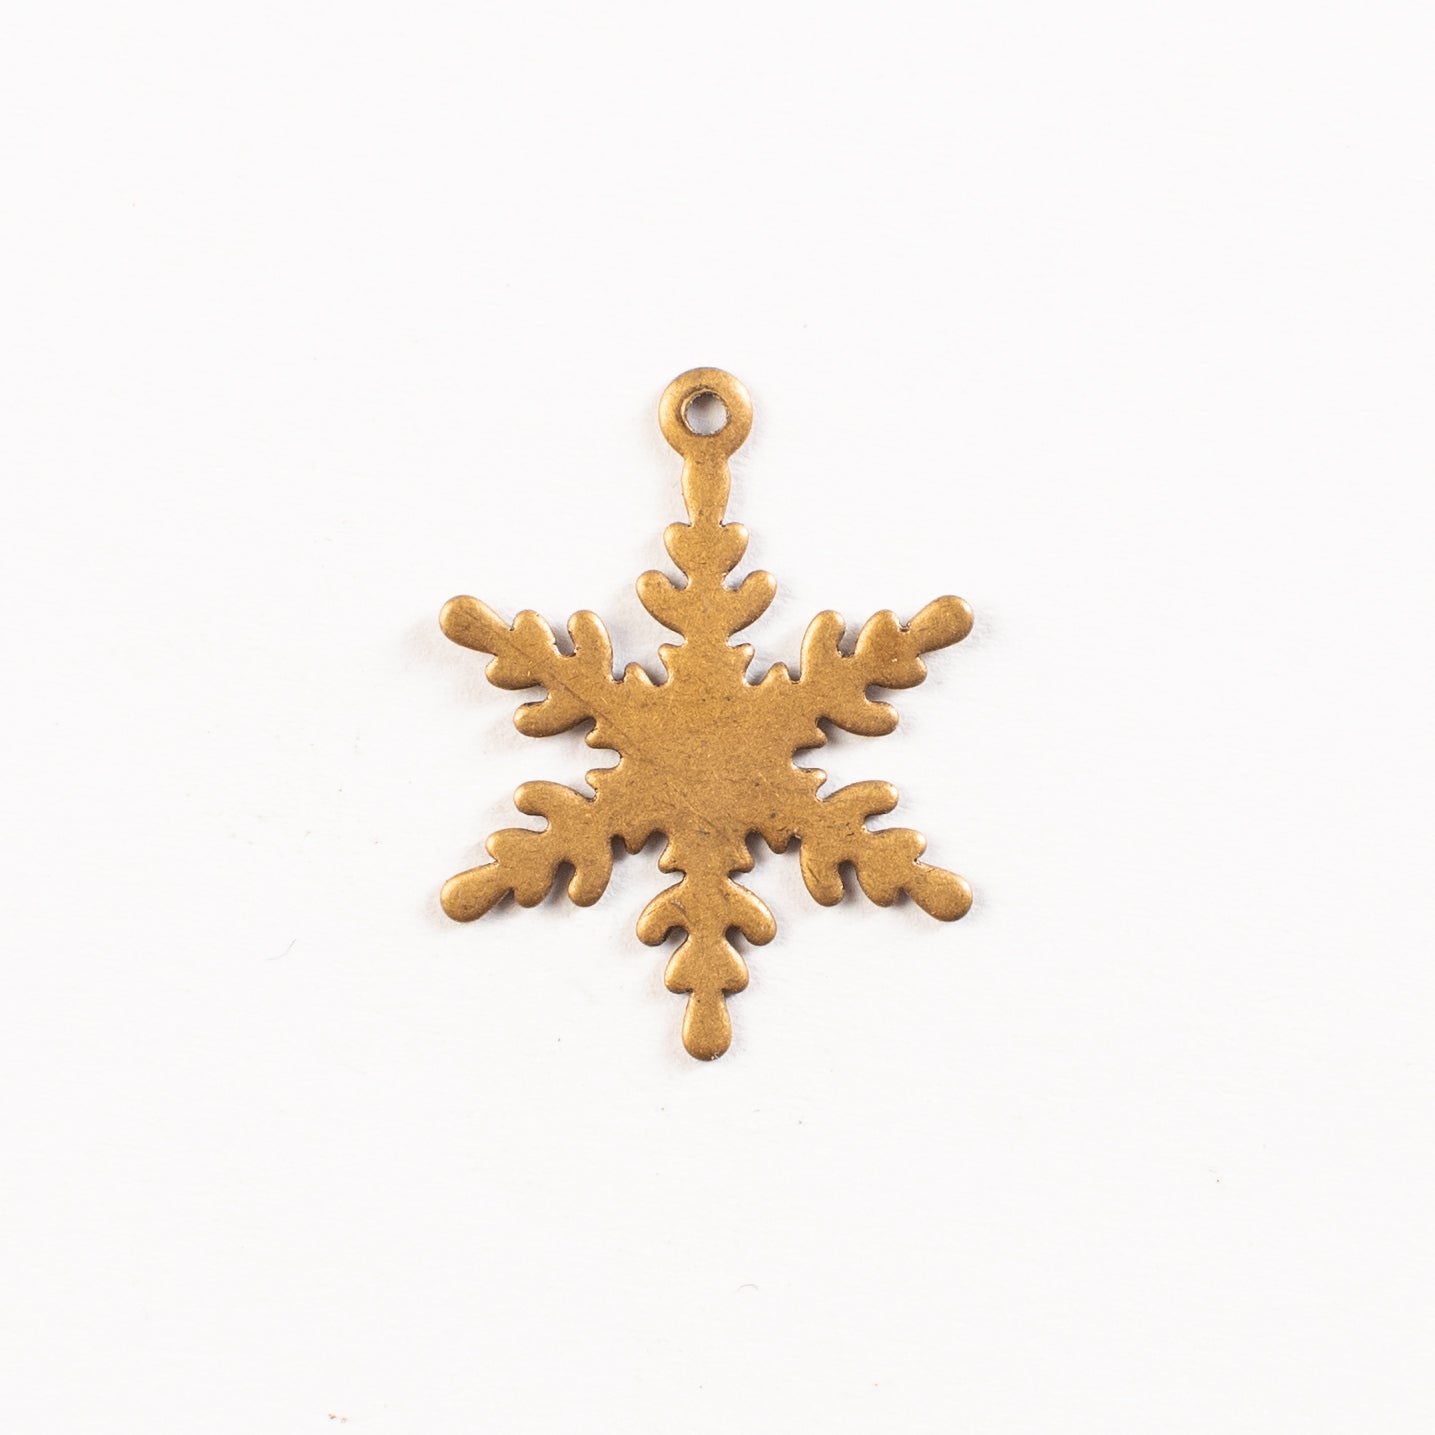 15mm Snowflake Christmas Charm, Antique Gold, pack of 6